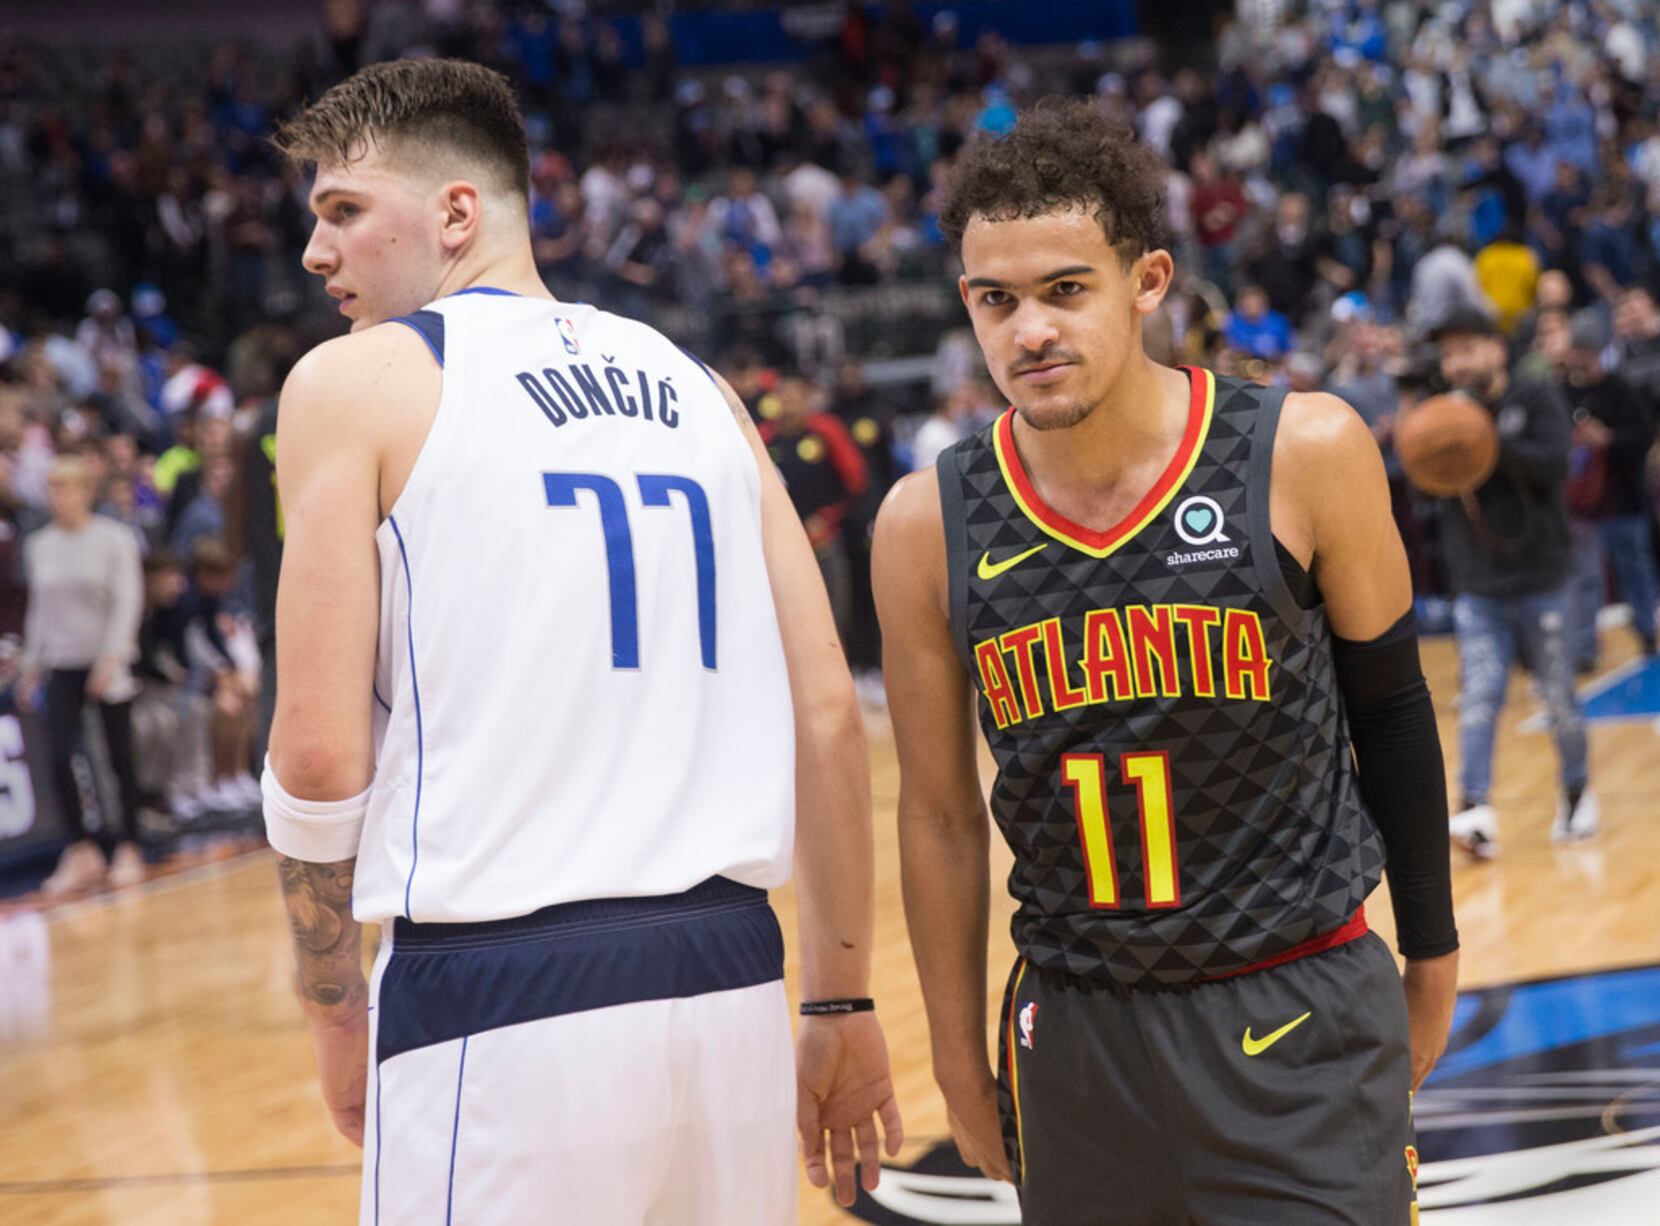 RIVALRY WEEK: Trae Young and Luka Doncic mean the Mavericks and